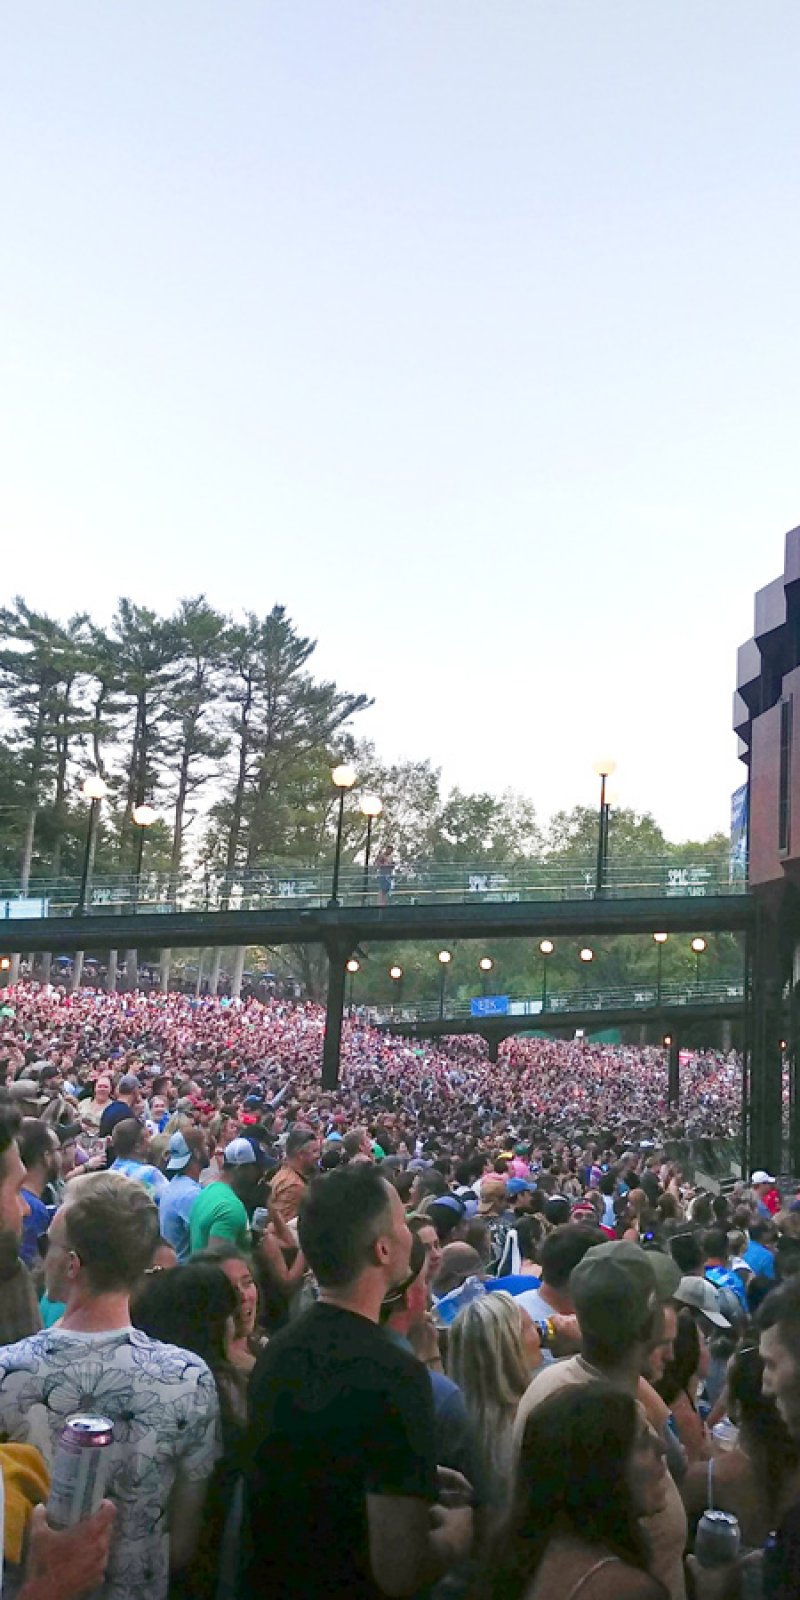 The crowd at Dave Matthews Band’s Friday, July 8, 2022 concert at SPAC. Photo by Kacie Cotter-Sacala.